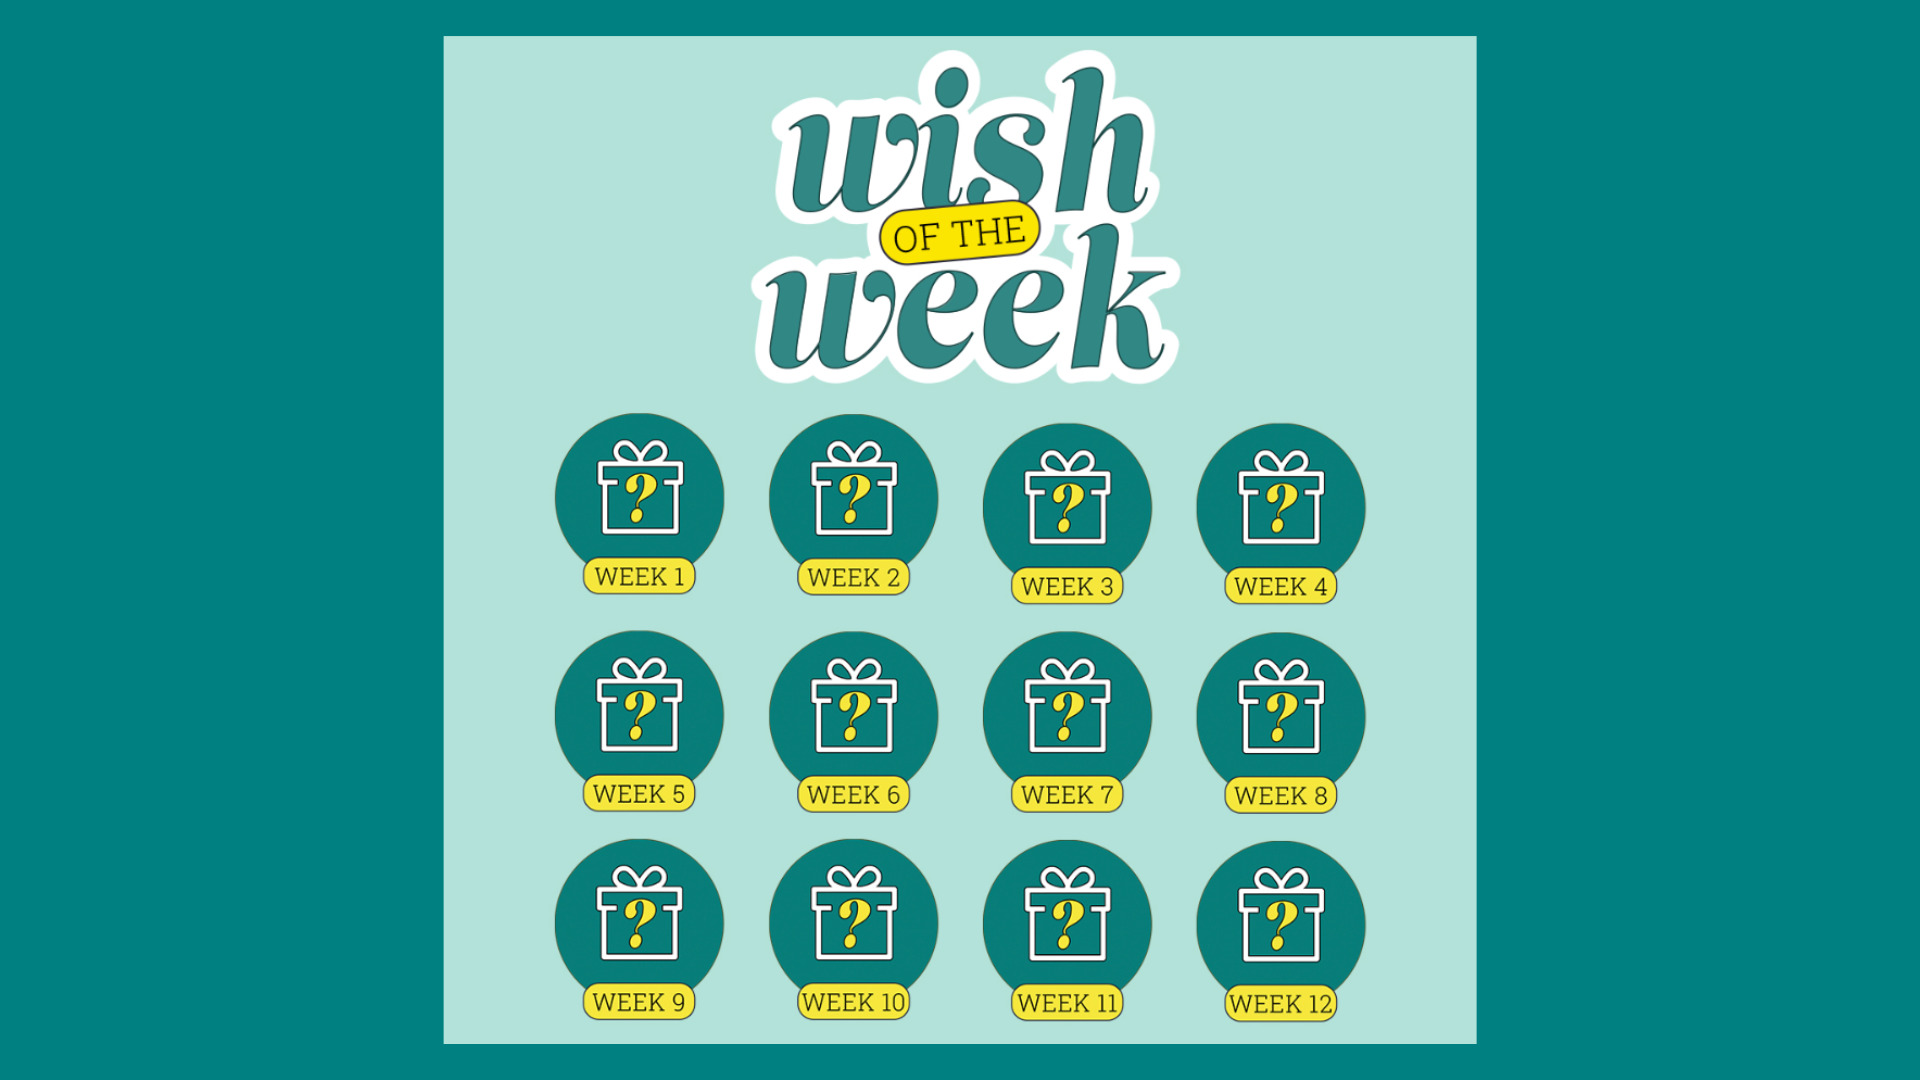 Elfster's Wish of the Week Giveaway features 12 weeks of prizes